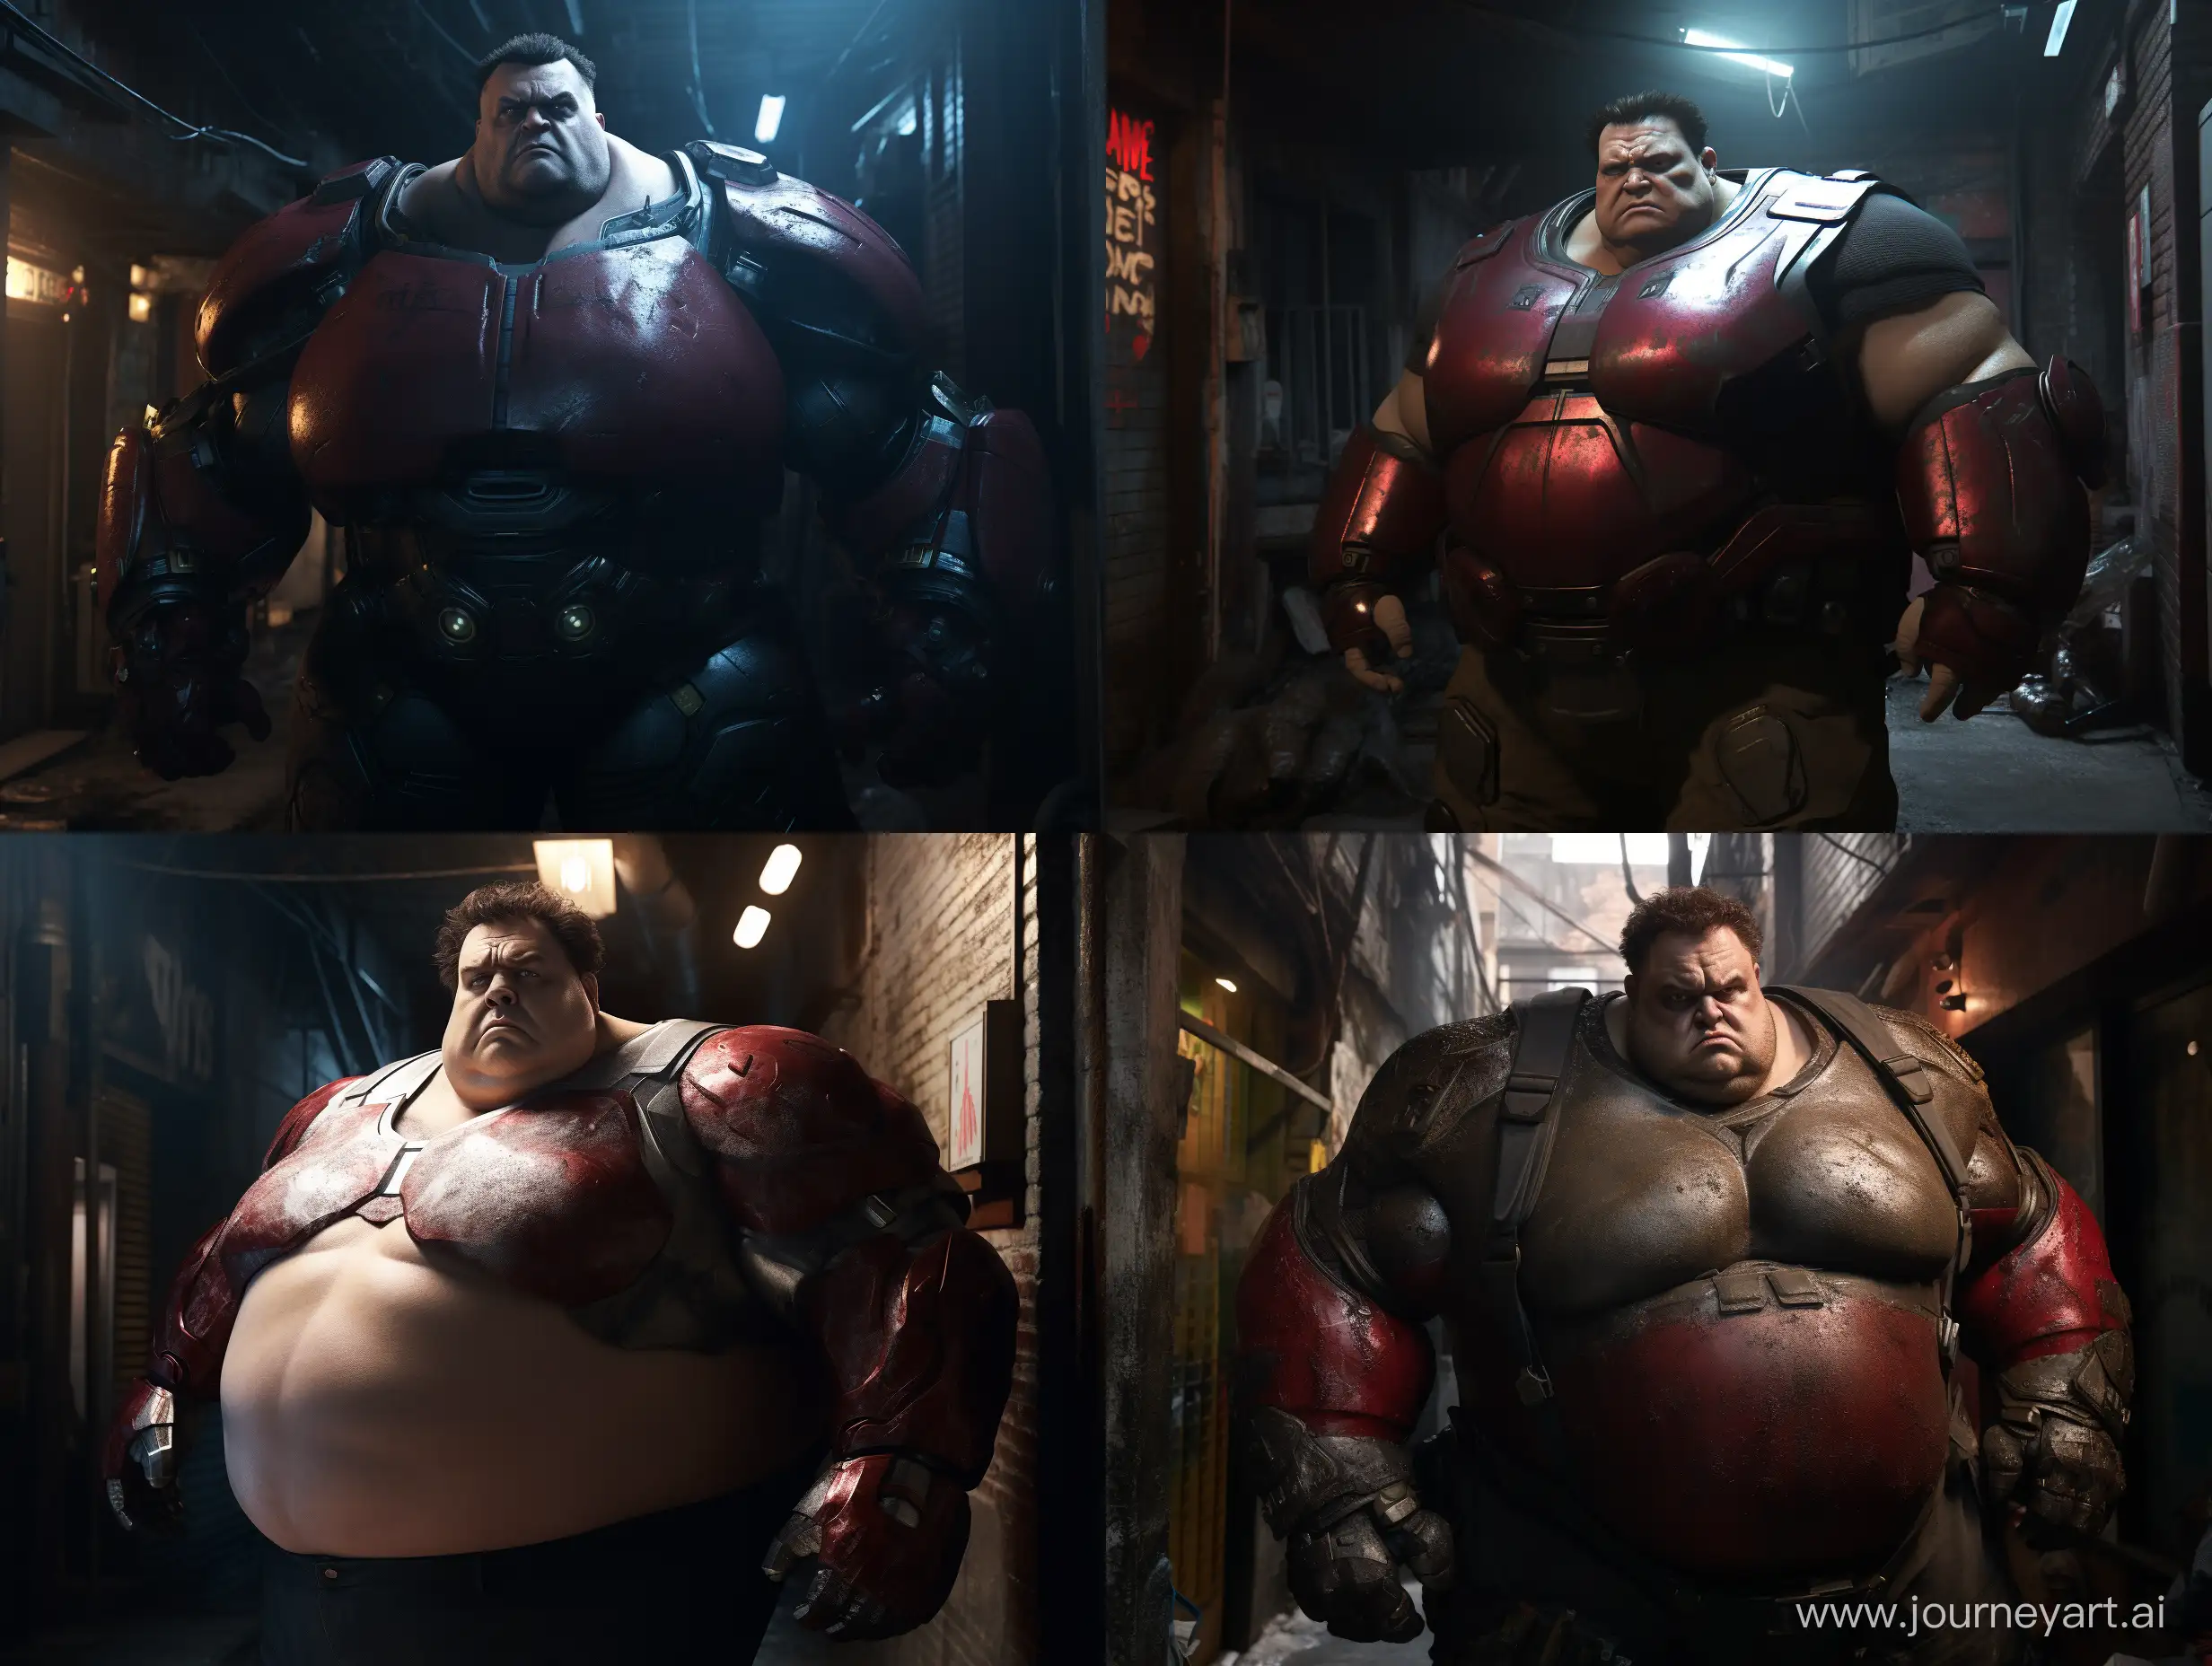 Chubby-Iron-Man-Poses-in-Cinematic-Alleyway